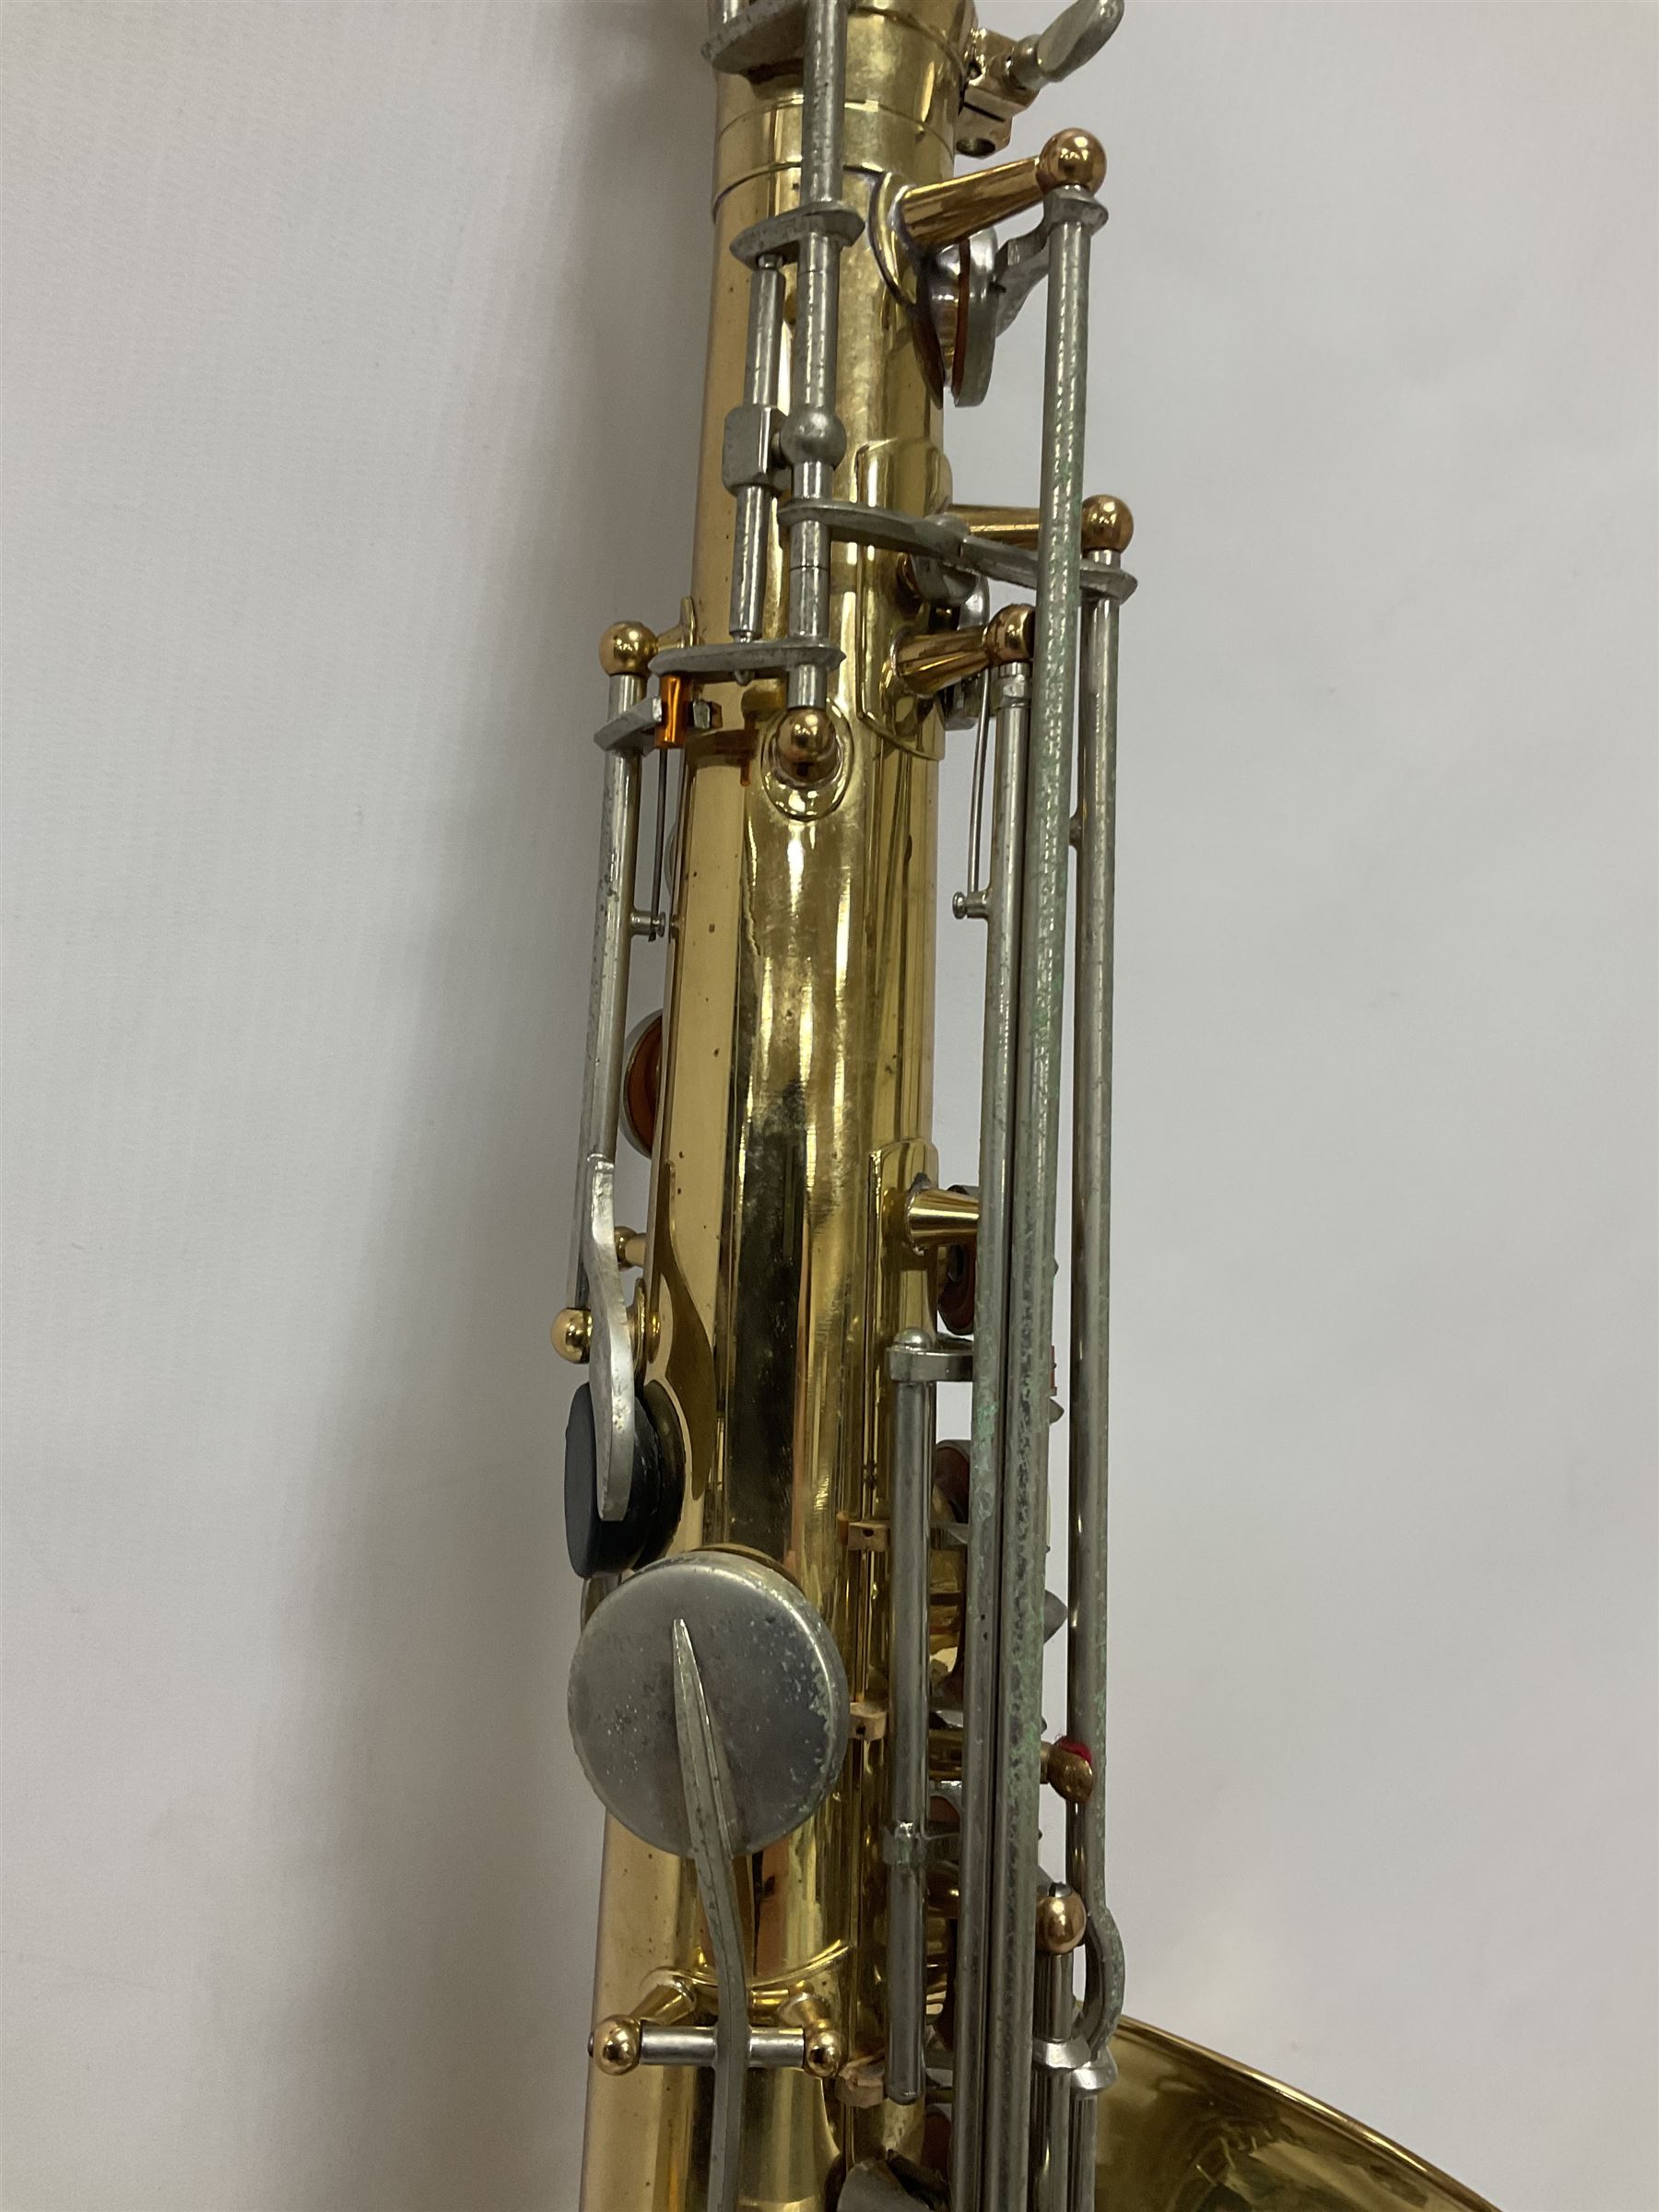 Earlham Tenor saxophone with mouthpiece in a fitted velvet lined hard case - Image 16 of 26